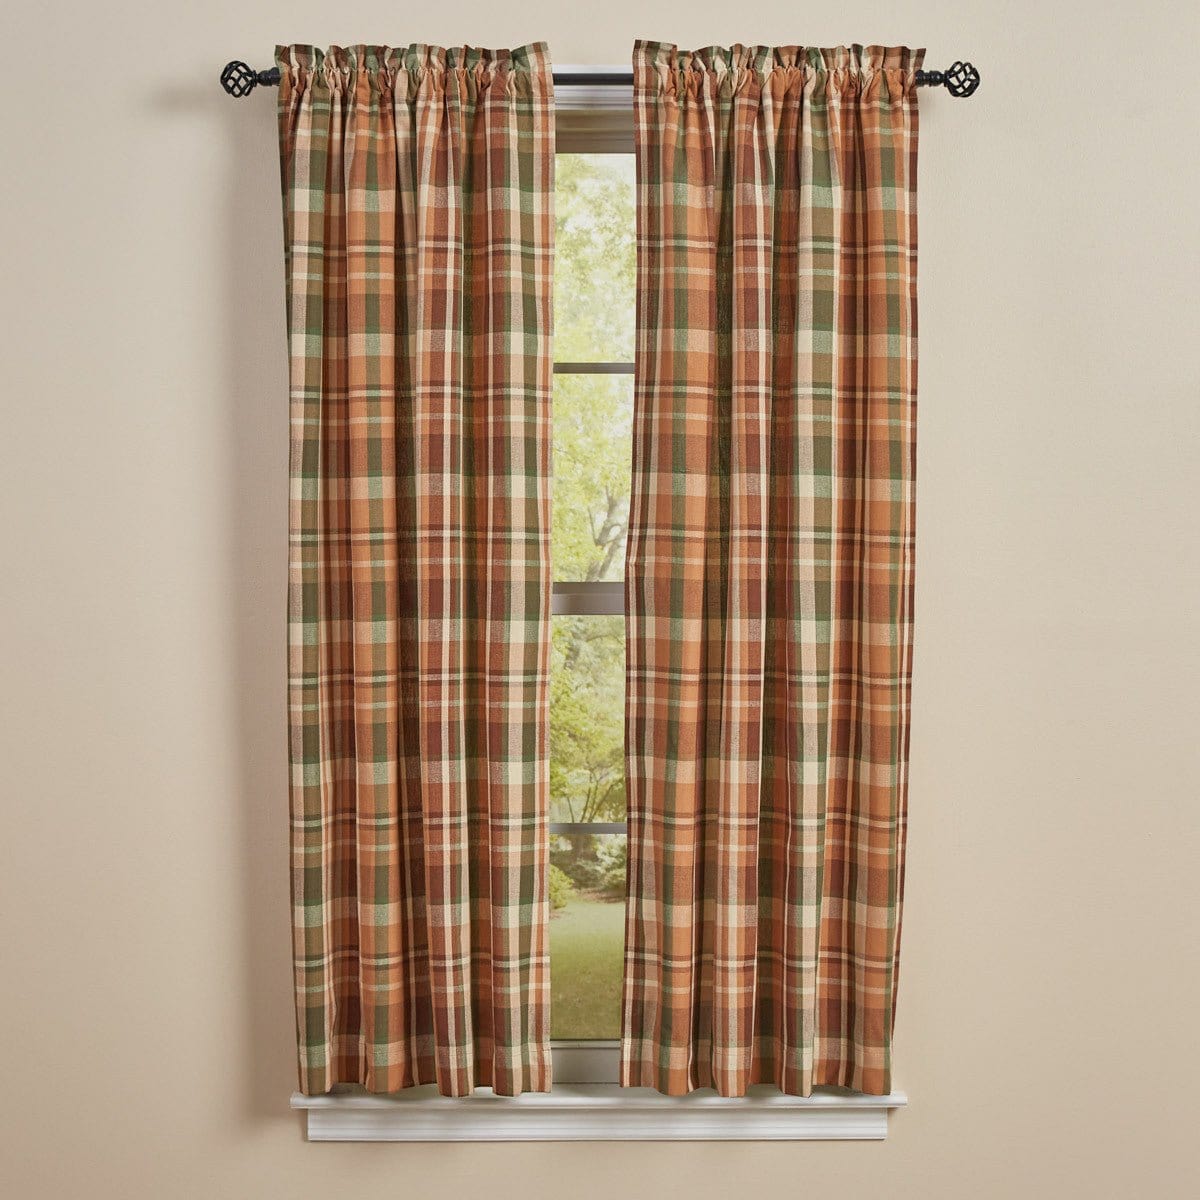 Woodbourne Panel Pair With Tie Backs 63" Long Unlined-Park Designs-The Village Merchant